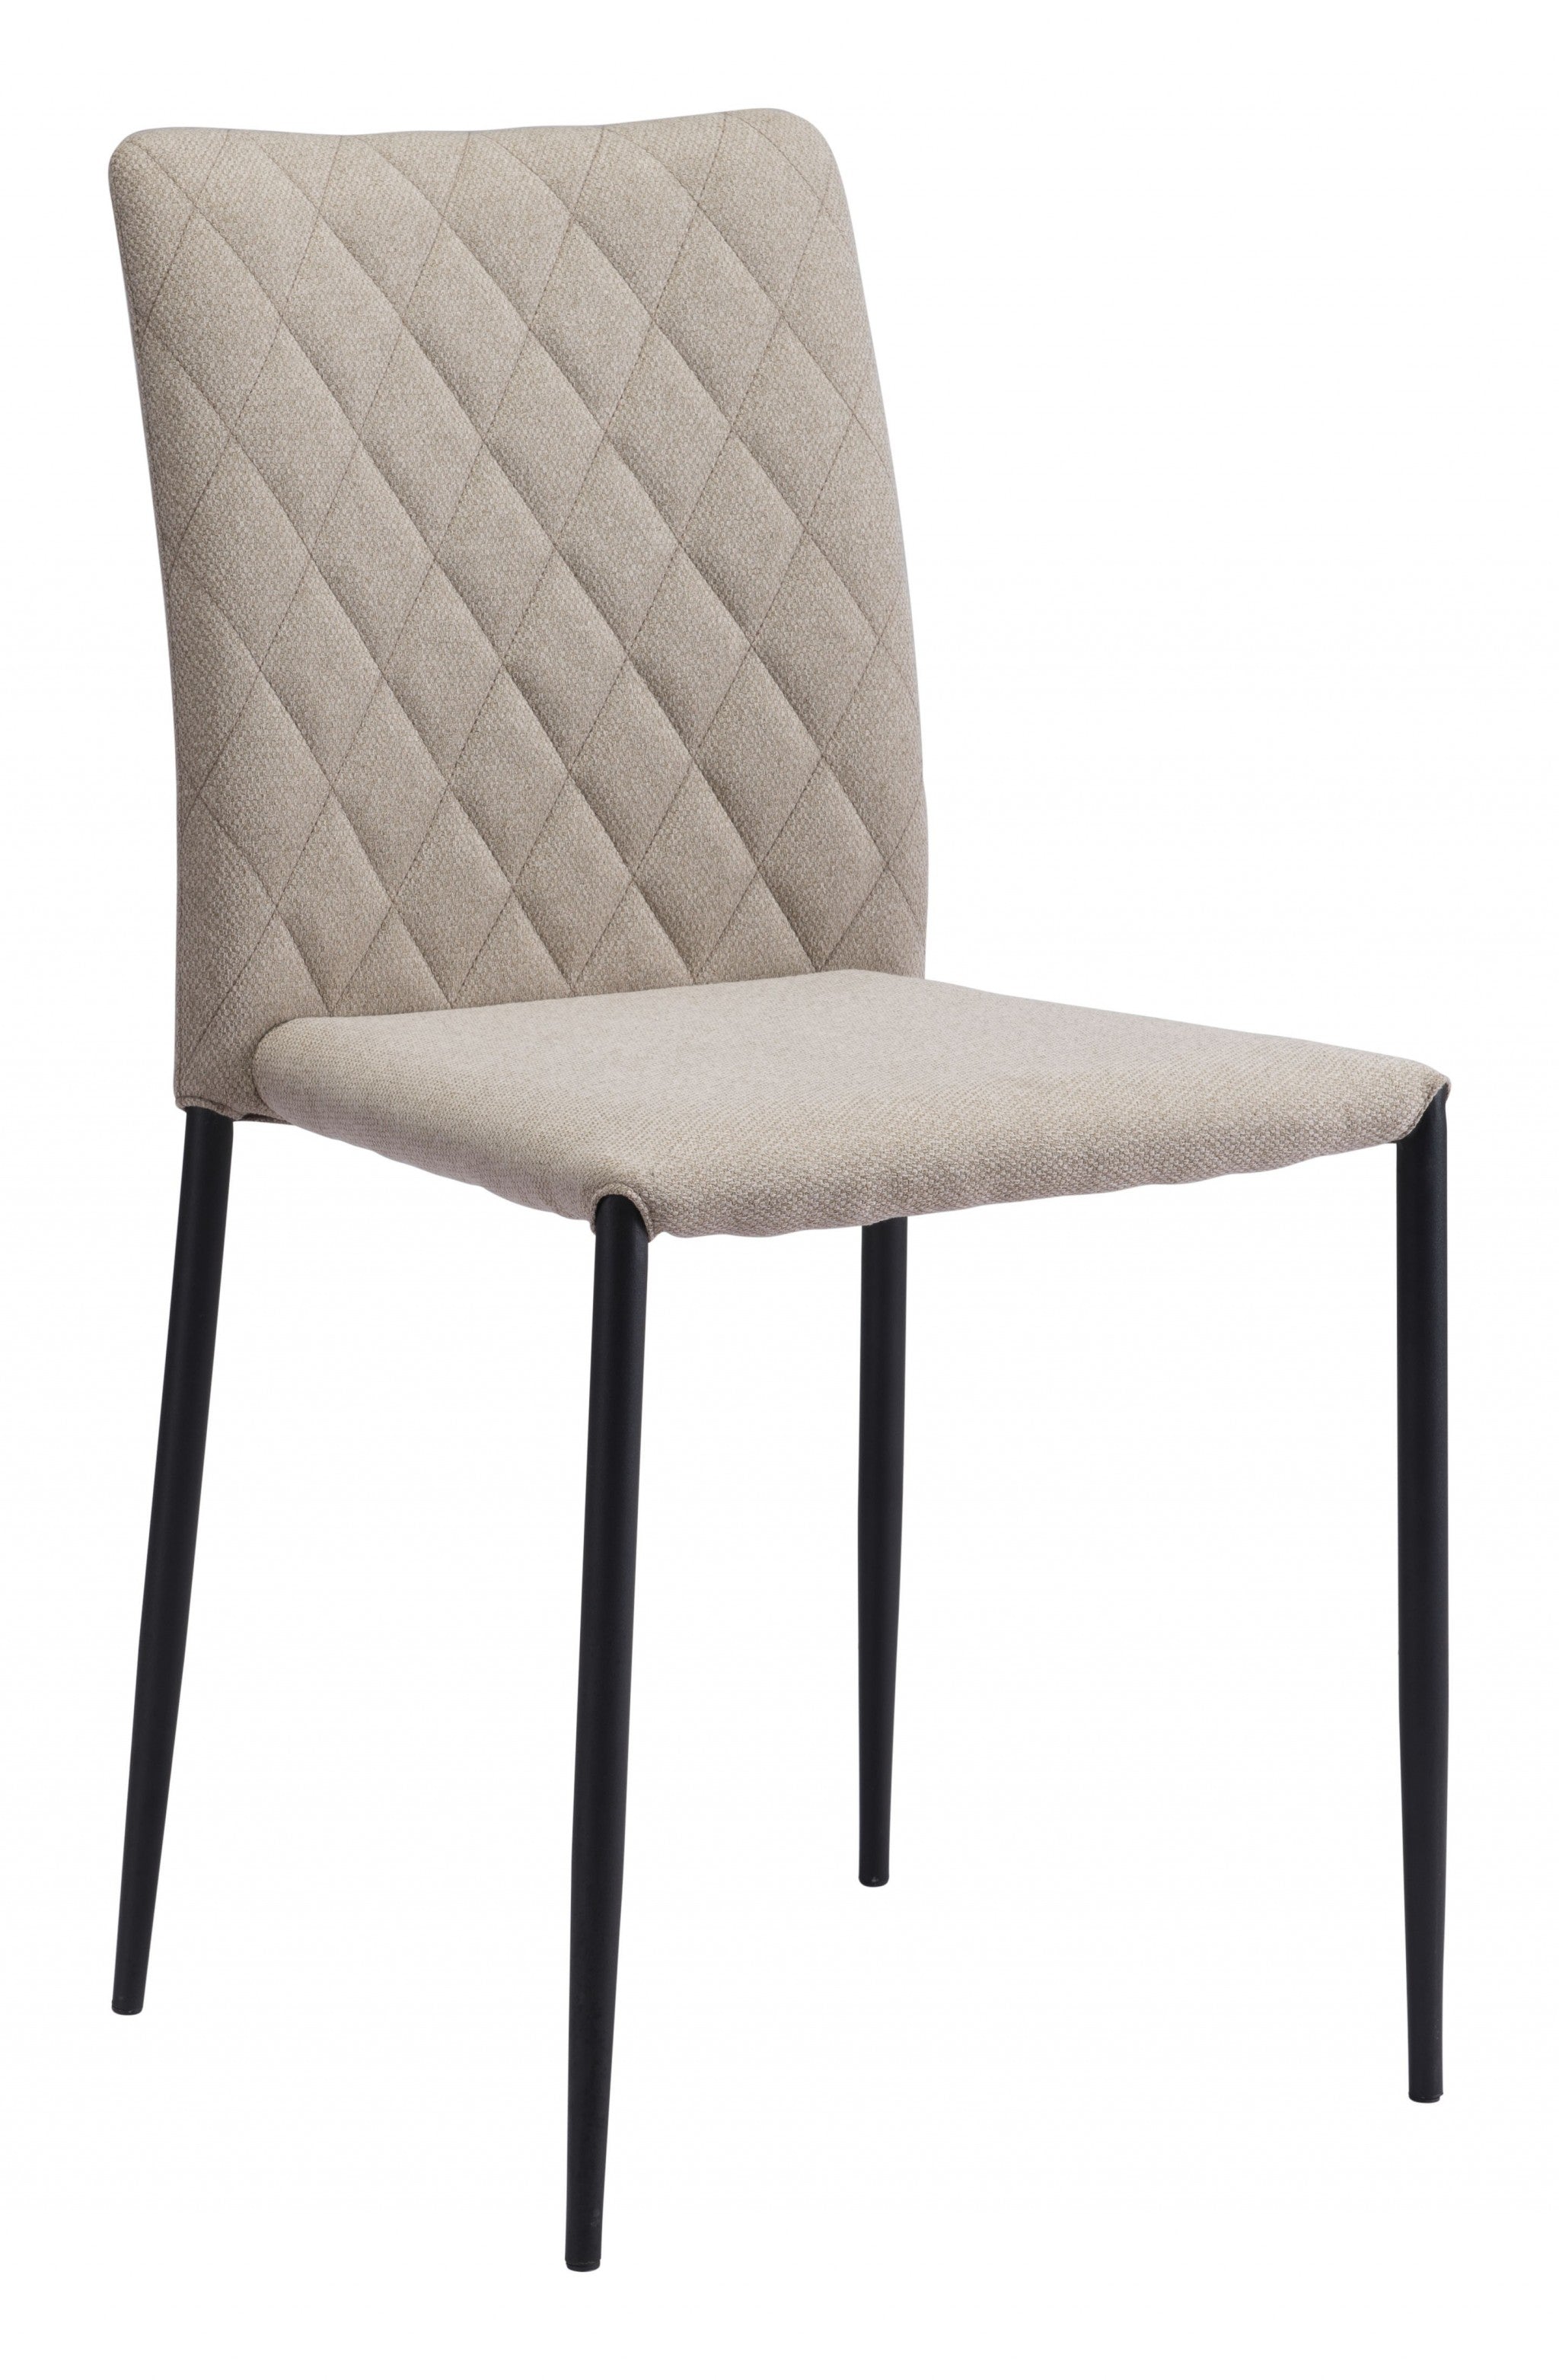 Set of Two Beige Diamond Weave Dining Chairs